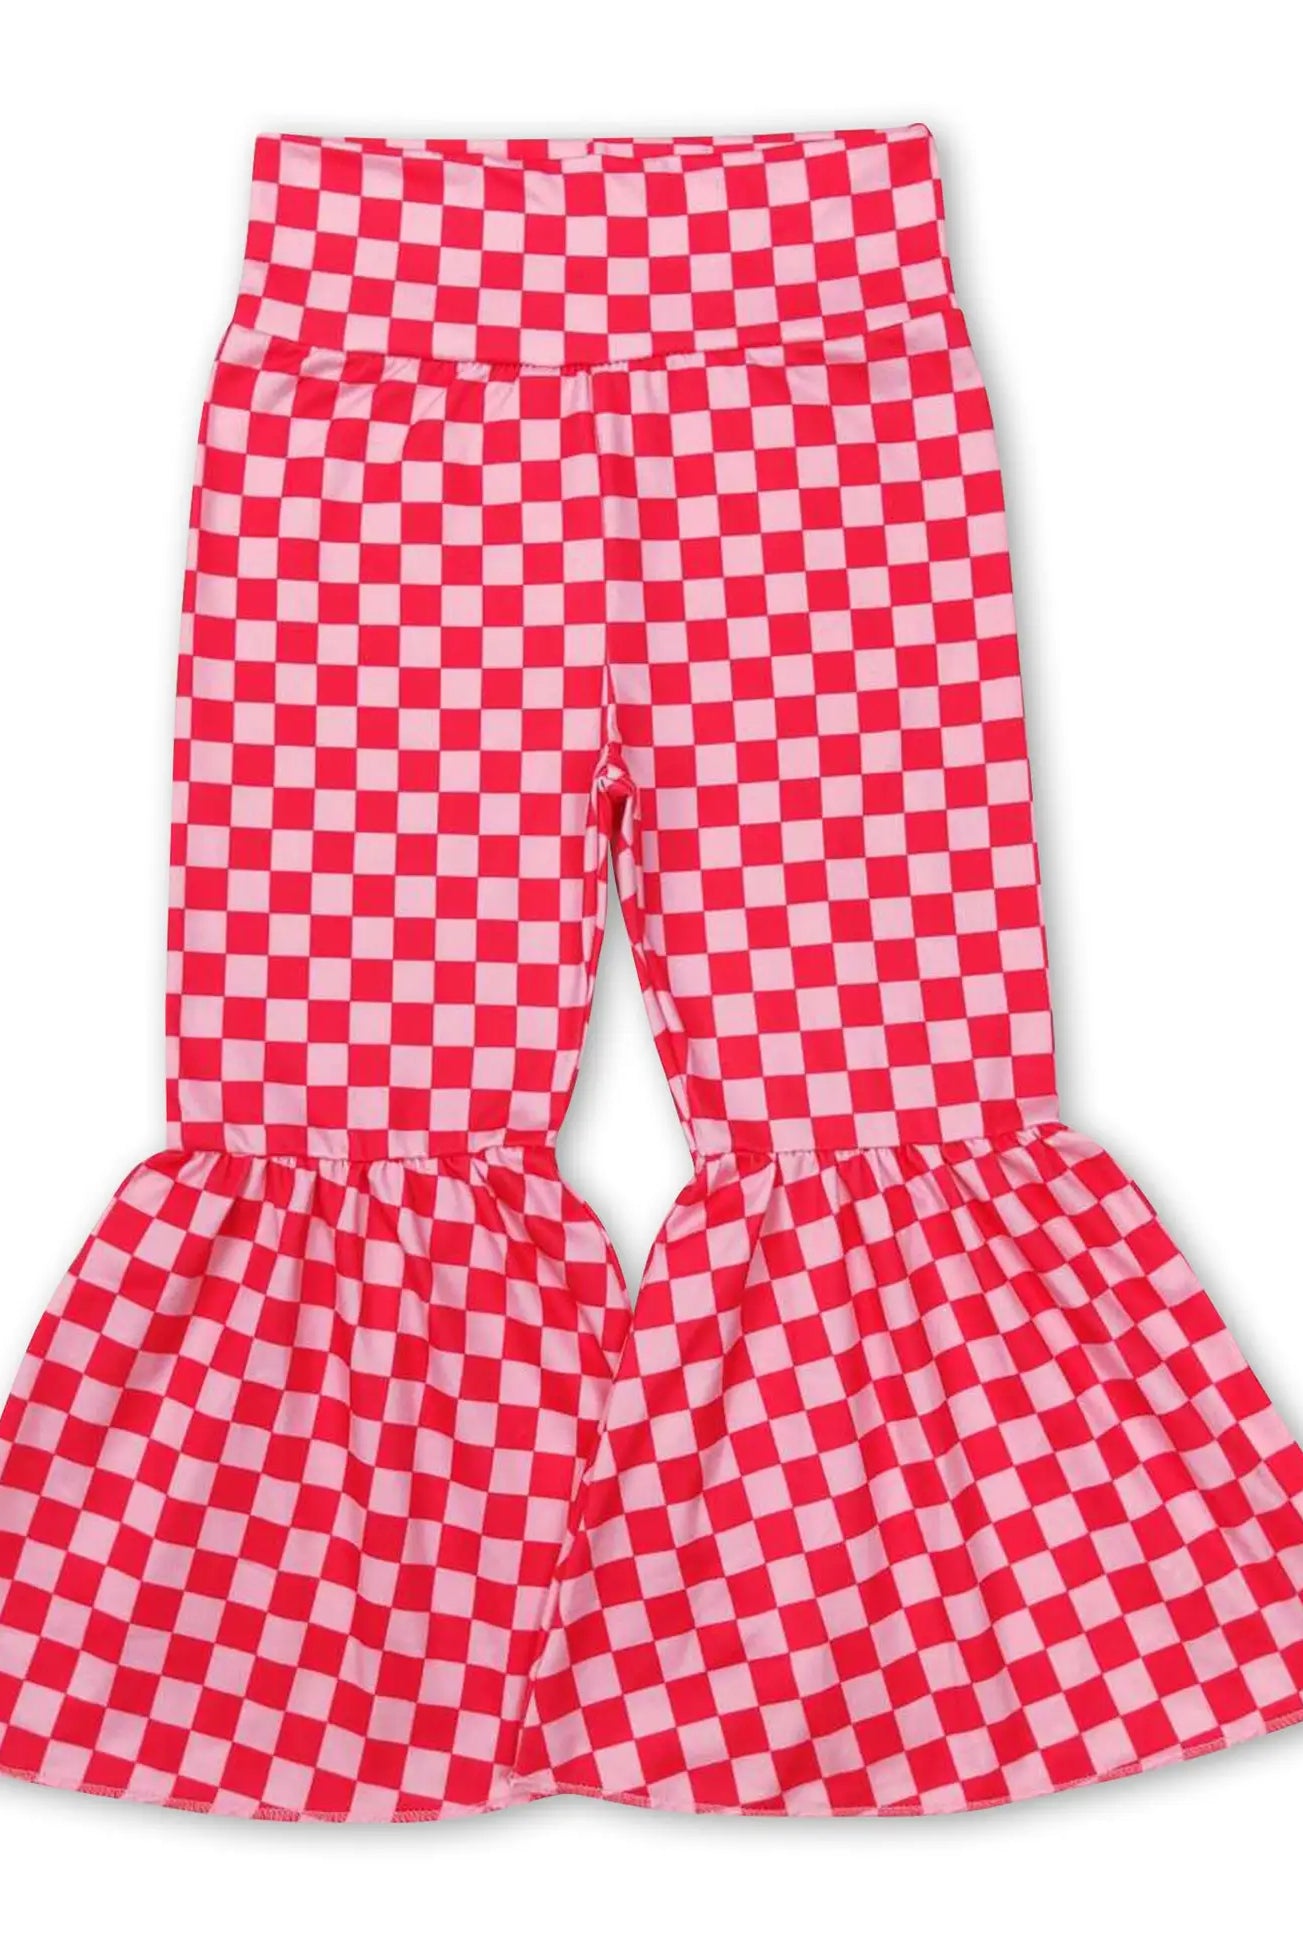 Checkerboard Pink Lovers Bells-Pants-Deadwood South Boutique & Company-Deadwood South Boutique, Women's Fashion Boutique in Henderson, TX